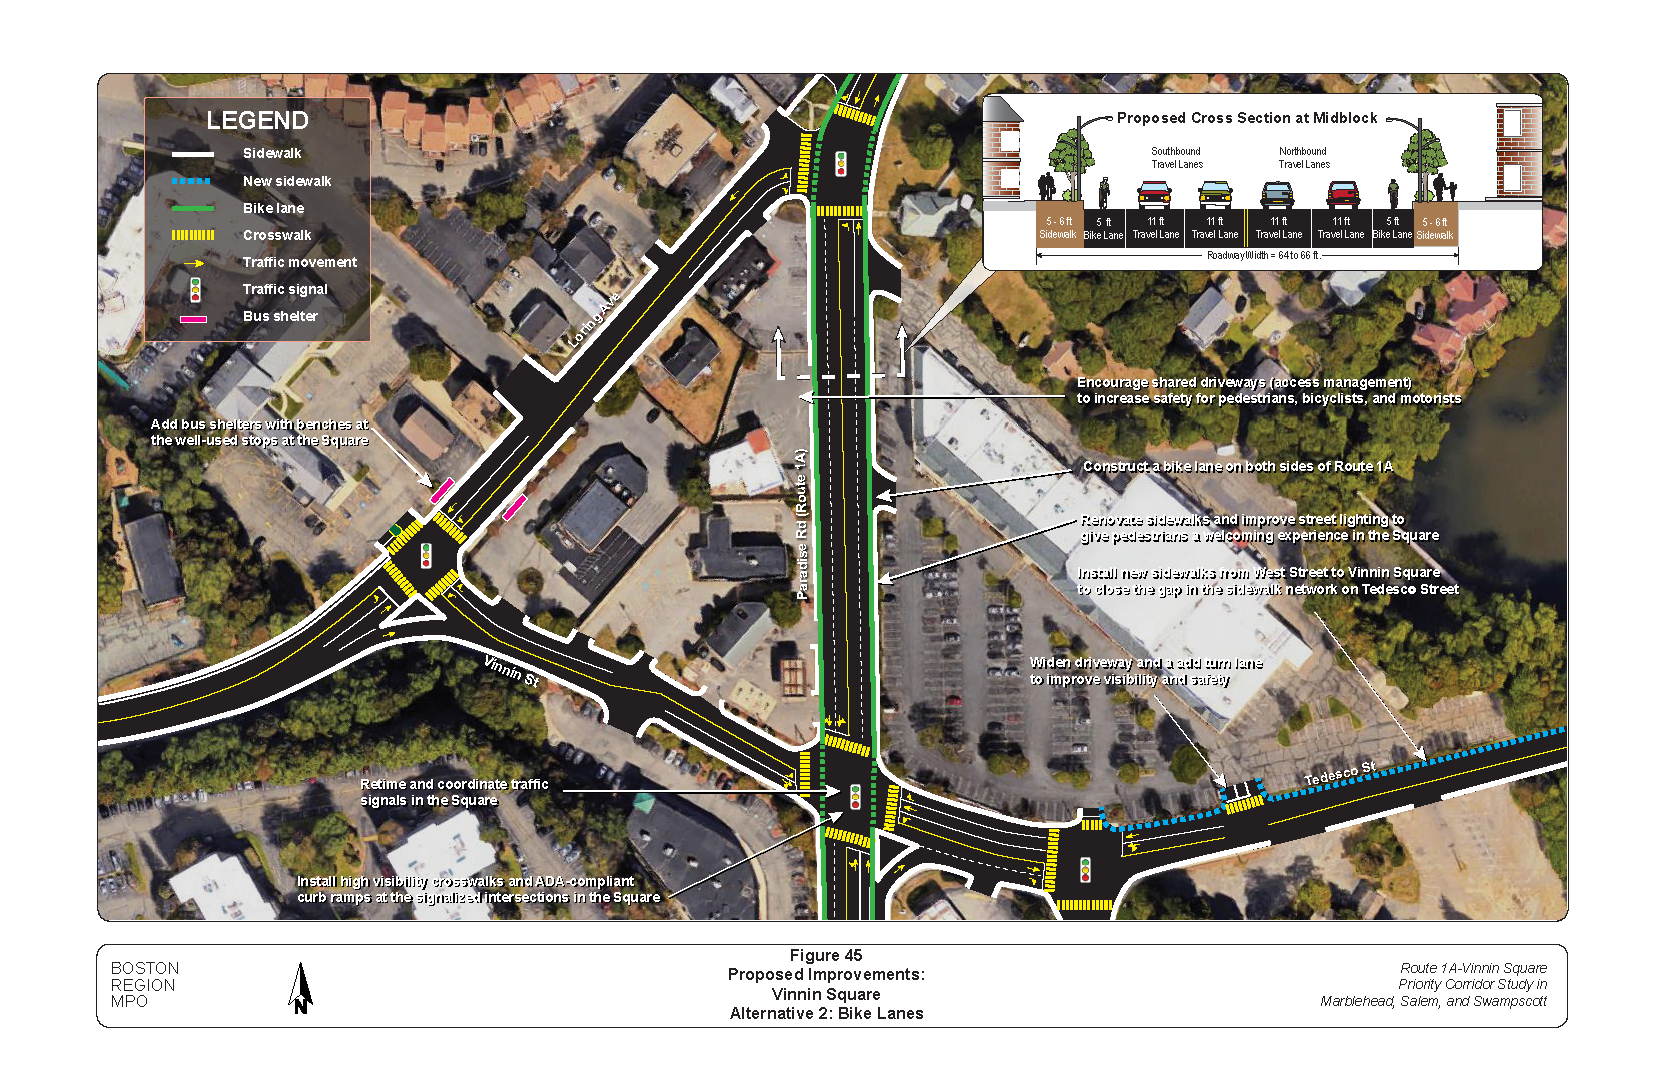 FIGURE 45. Proposed Improvements, Alternative 2: Vinnin Square, Bike Lanes.Figure 45 is a map of Vinnin Square showing the location of proposed improvements in Alternative 2. The proposed improvements are described in text boxes. Graphics embedded show proposed roadway cross sections with lane widths.